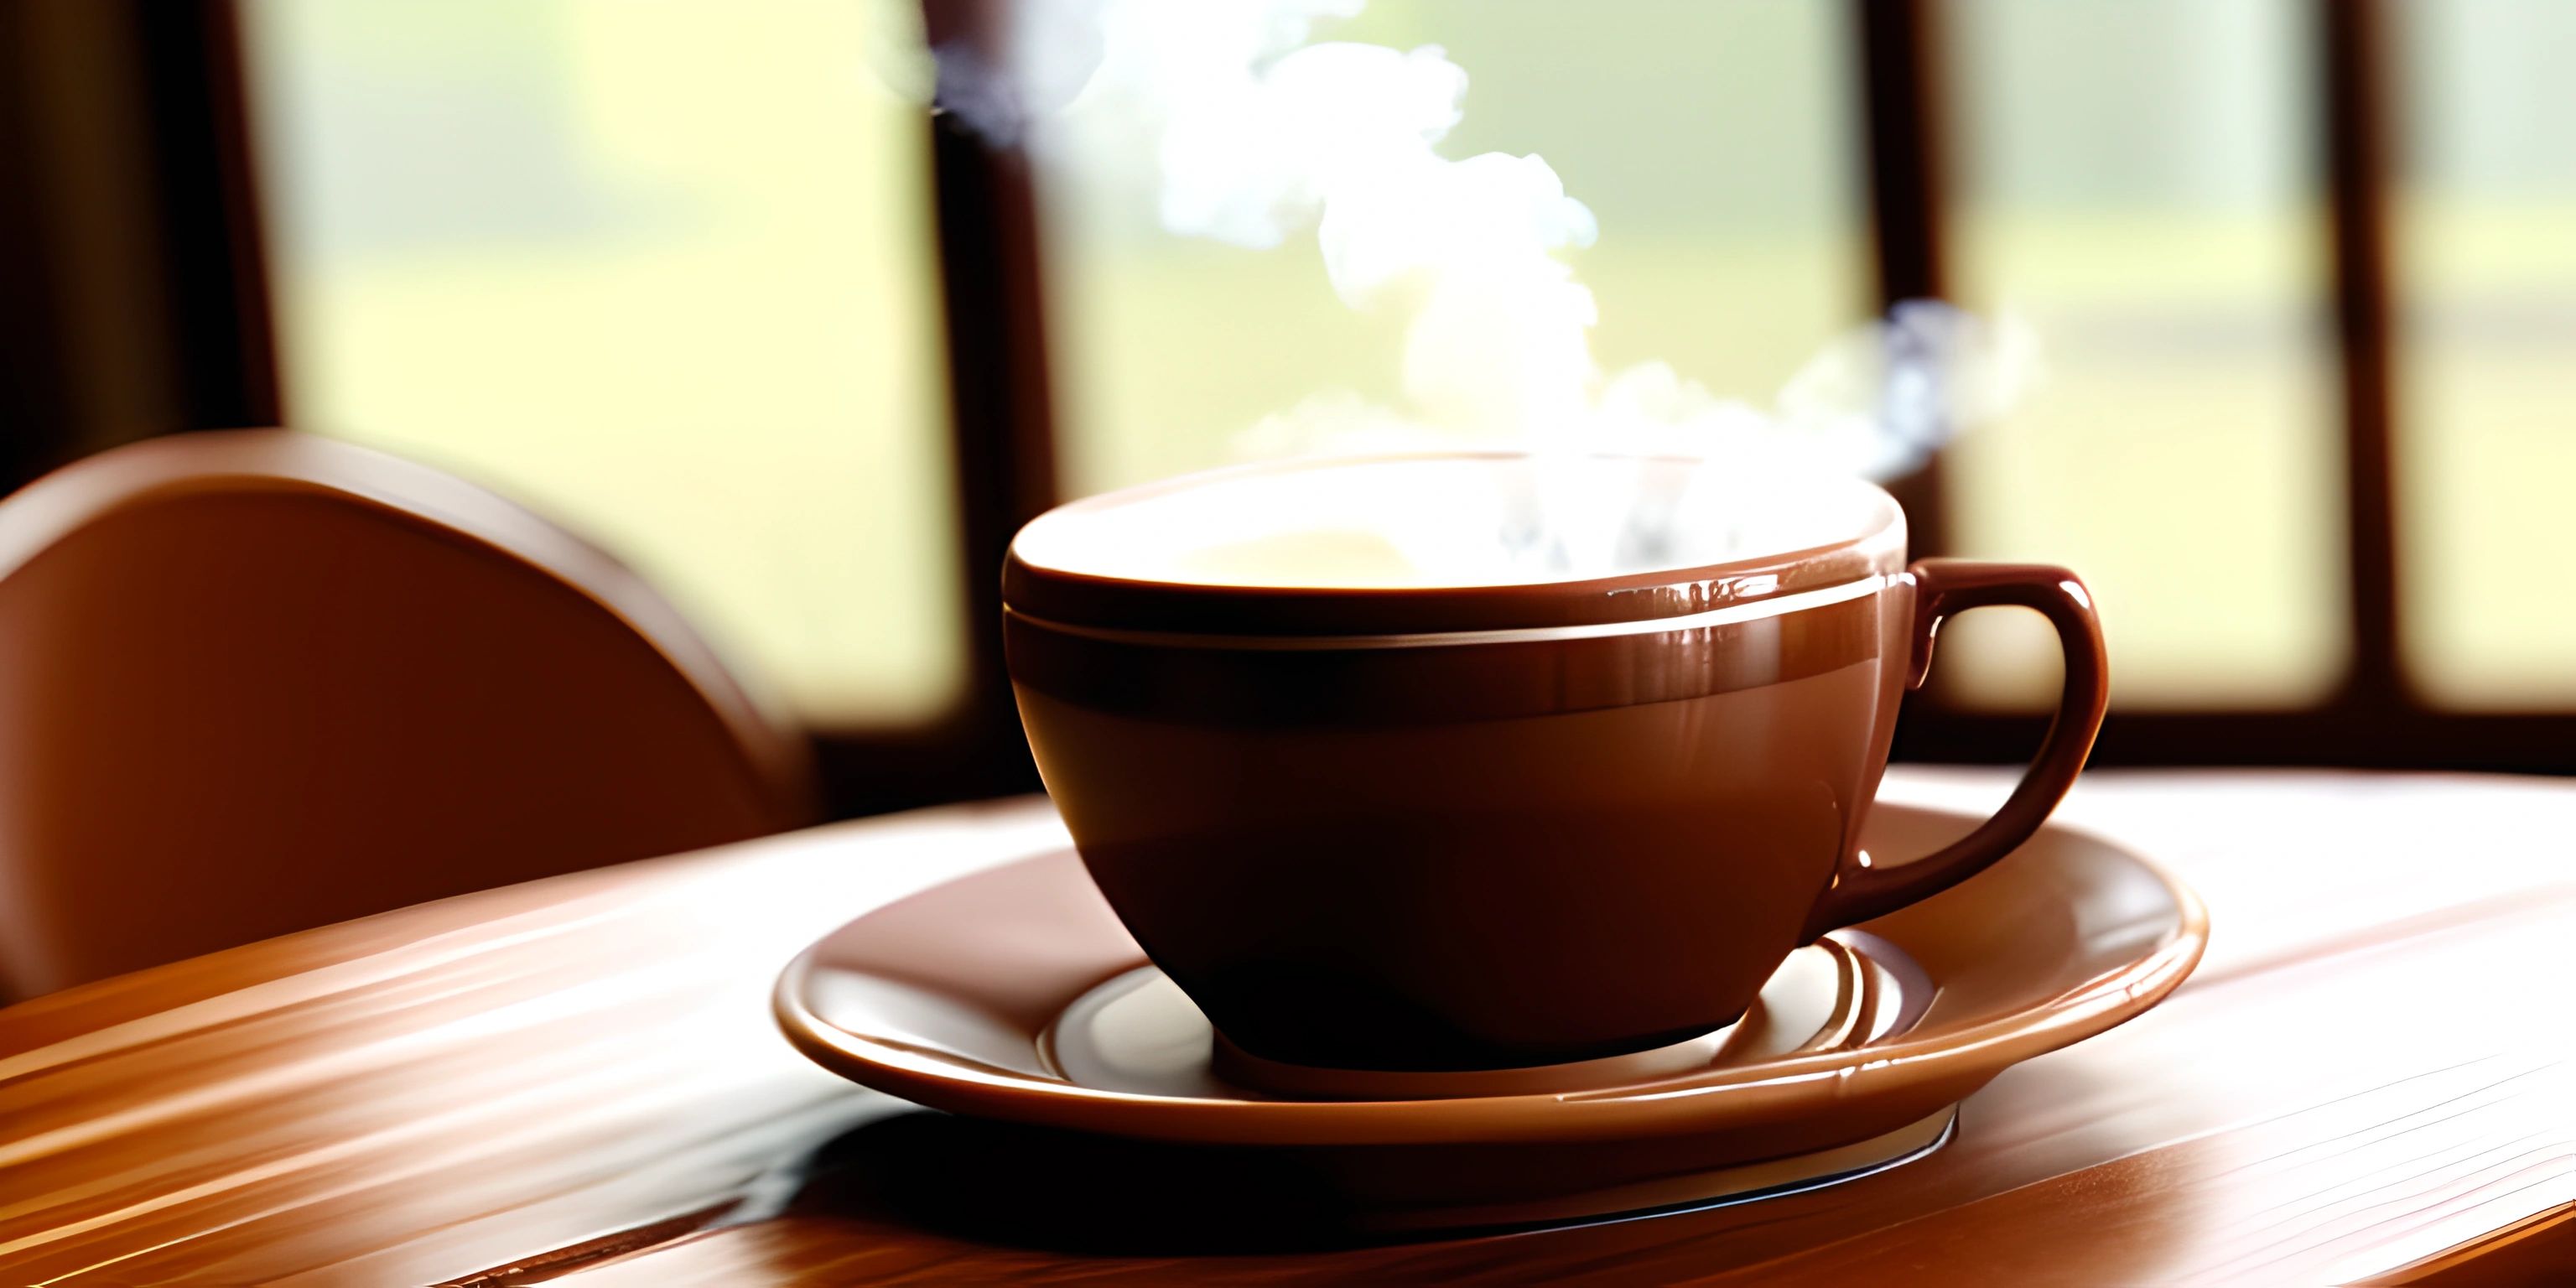 a coffee cup on top of a saucer on a wooden table near a window